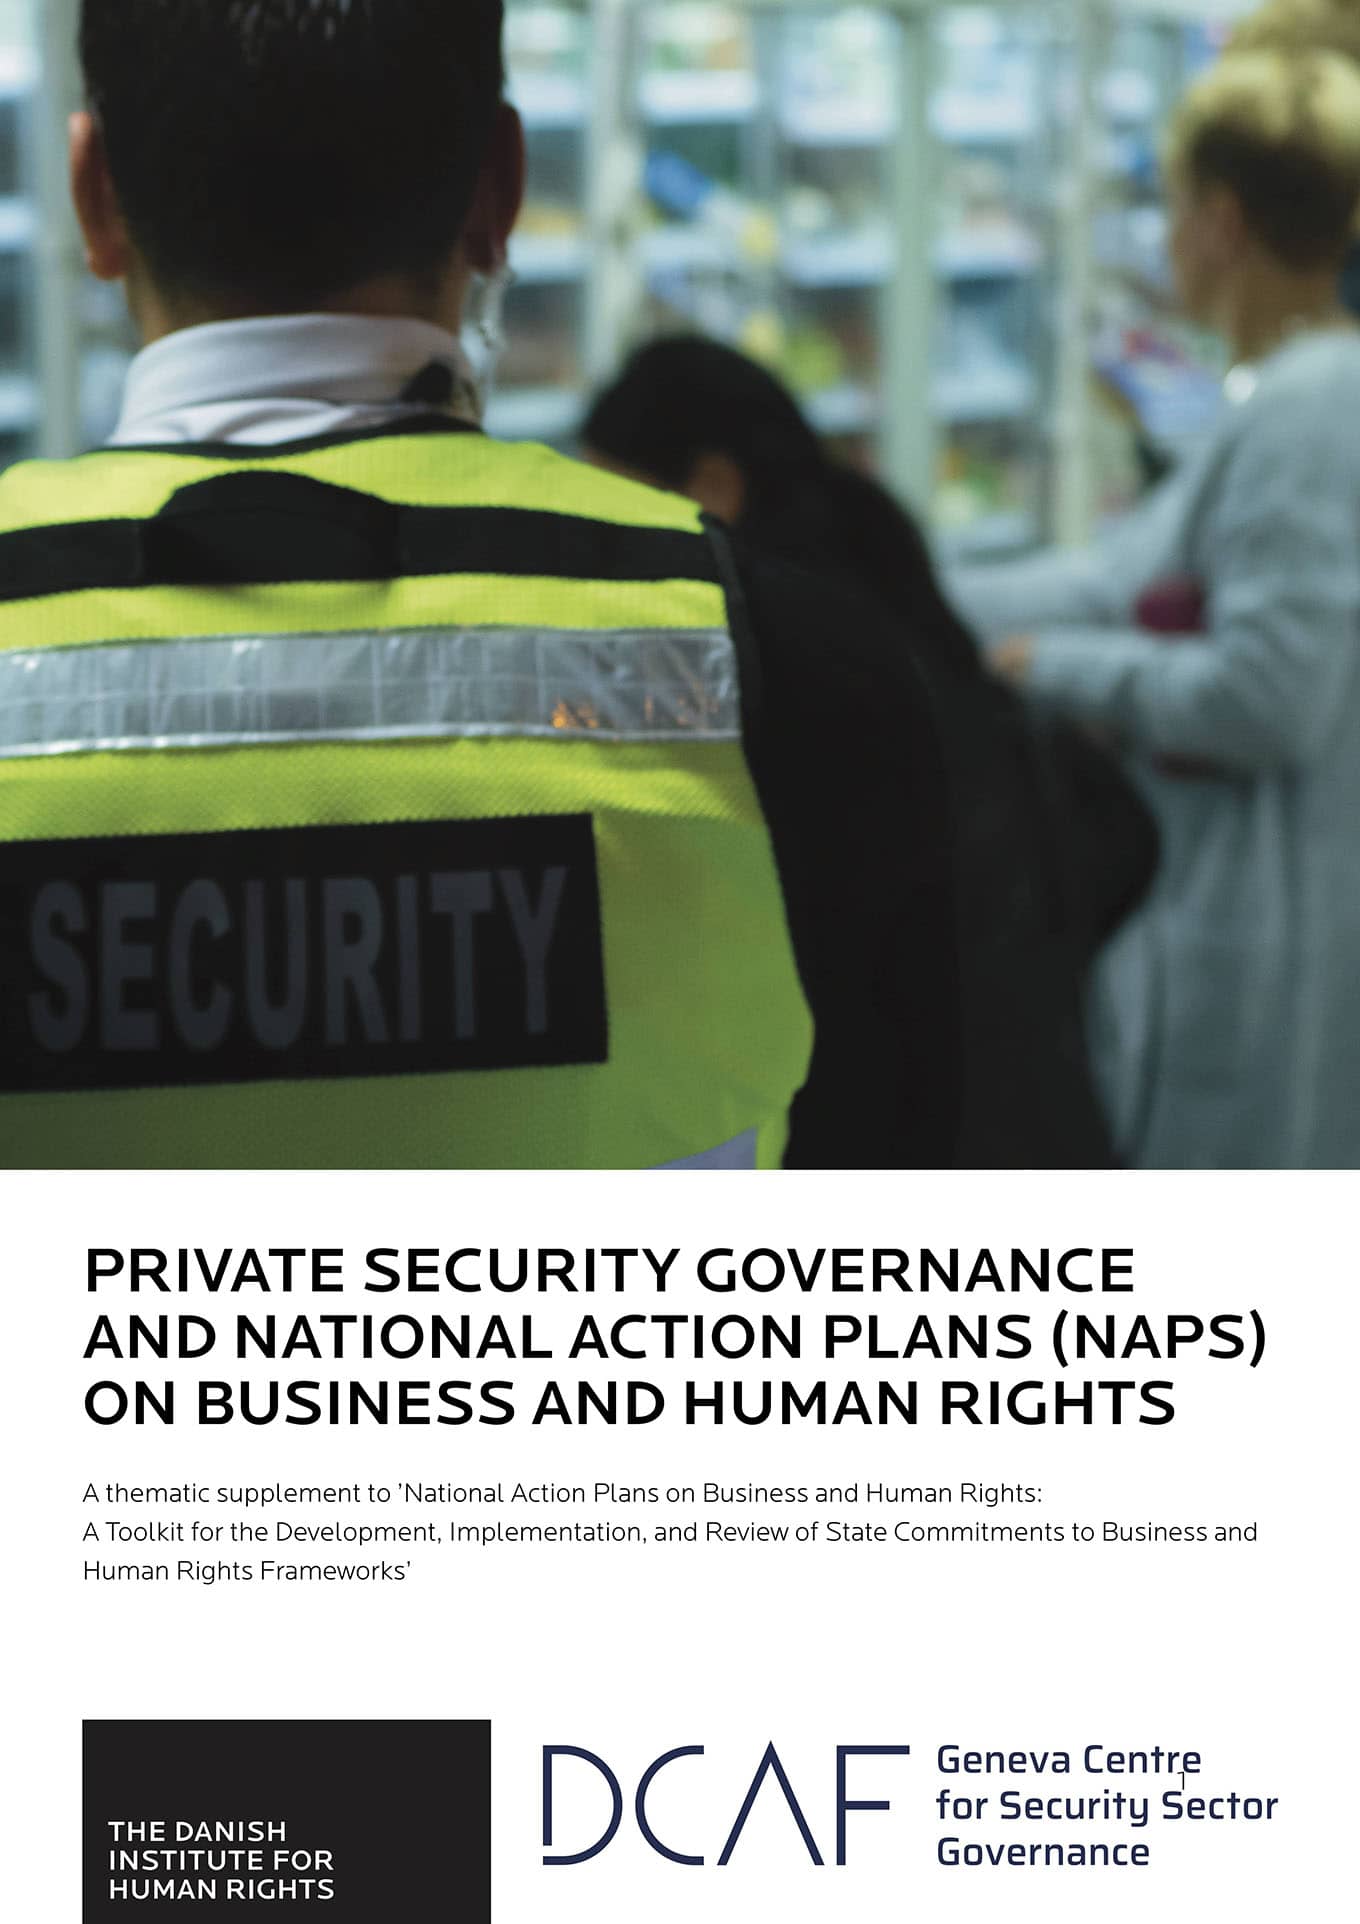 Private Security Governance National Action Plans (NAPS) on Business and Human Rights (DIHR, Danish Institute for Human Rights & DCAF, Geneva Centre for Security Sector Governance, 2019)